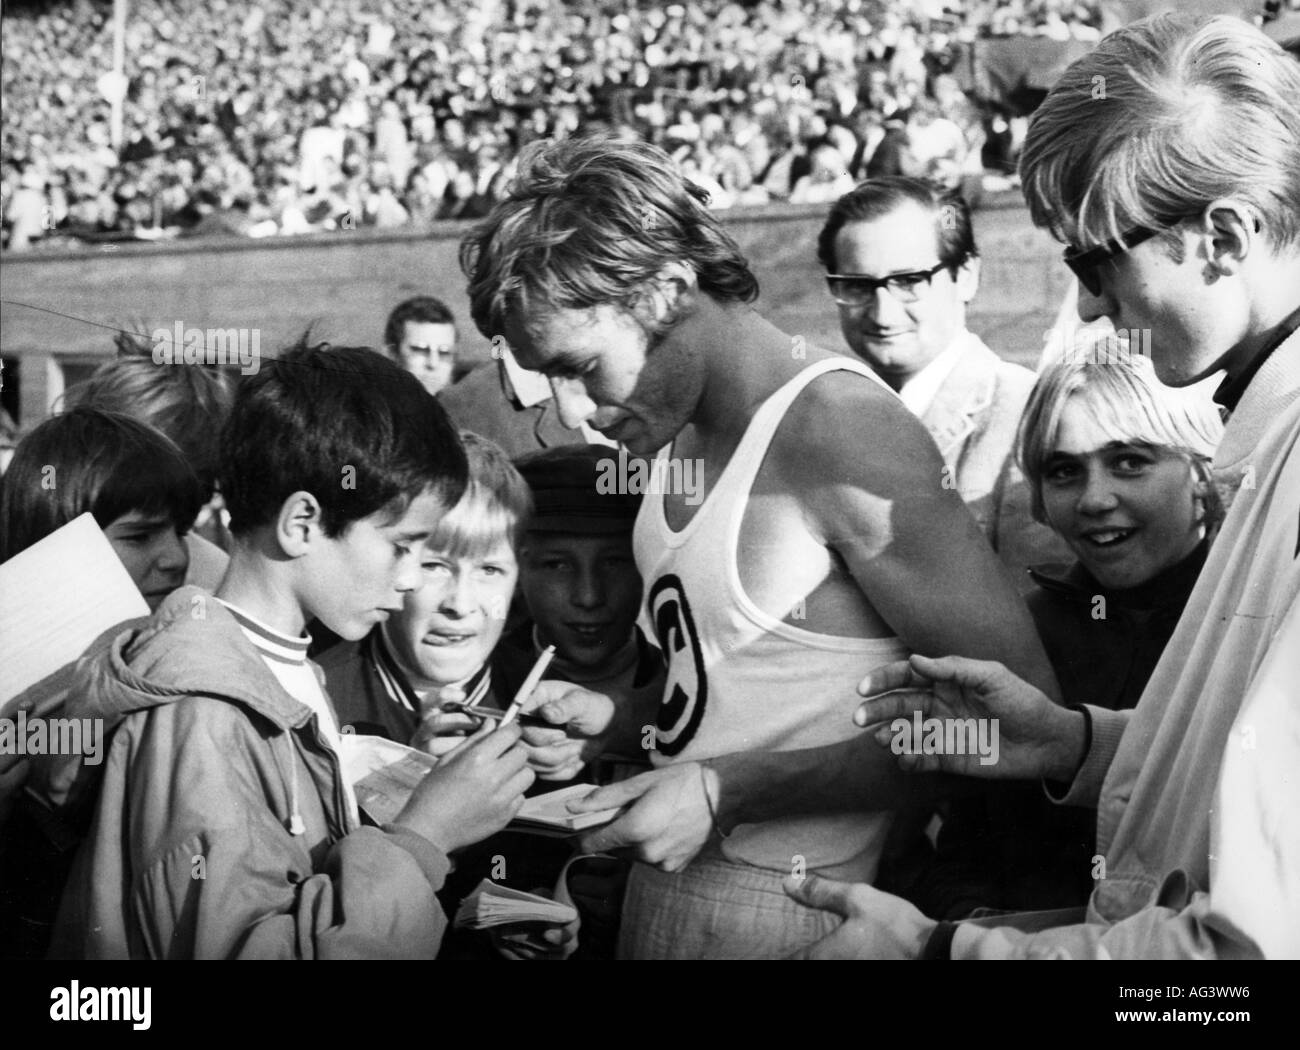 Zacharias, Thomas, German athlete (high jump), with his fans, at the Olympic Stadion in Berlin, Germany, 1968, Stock Photo